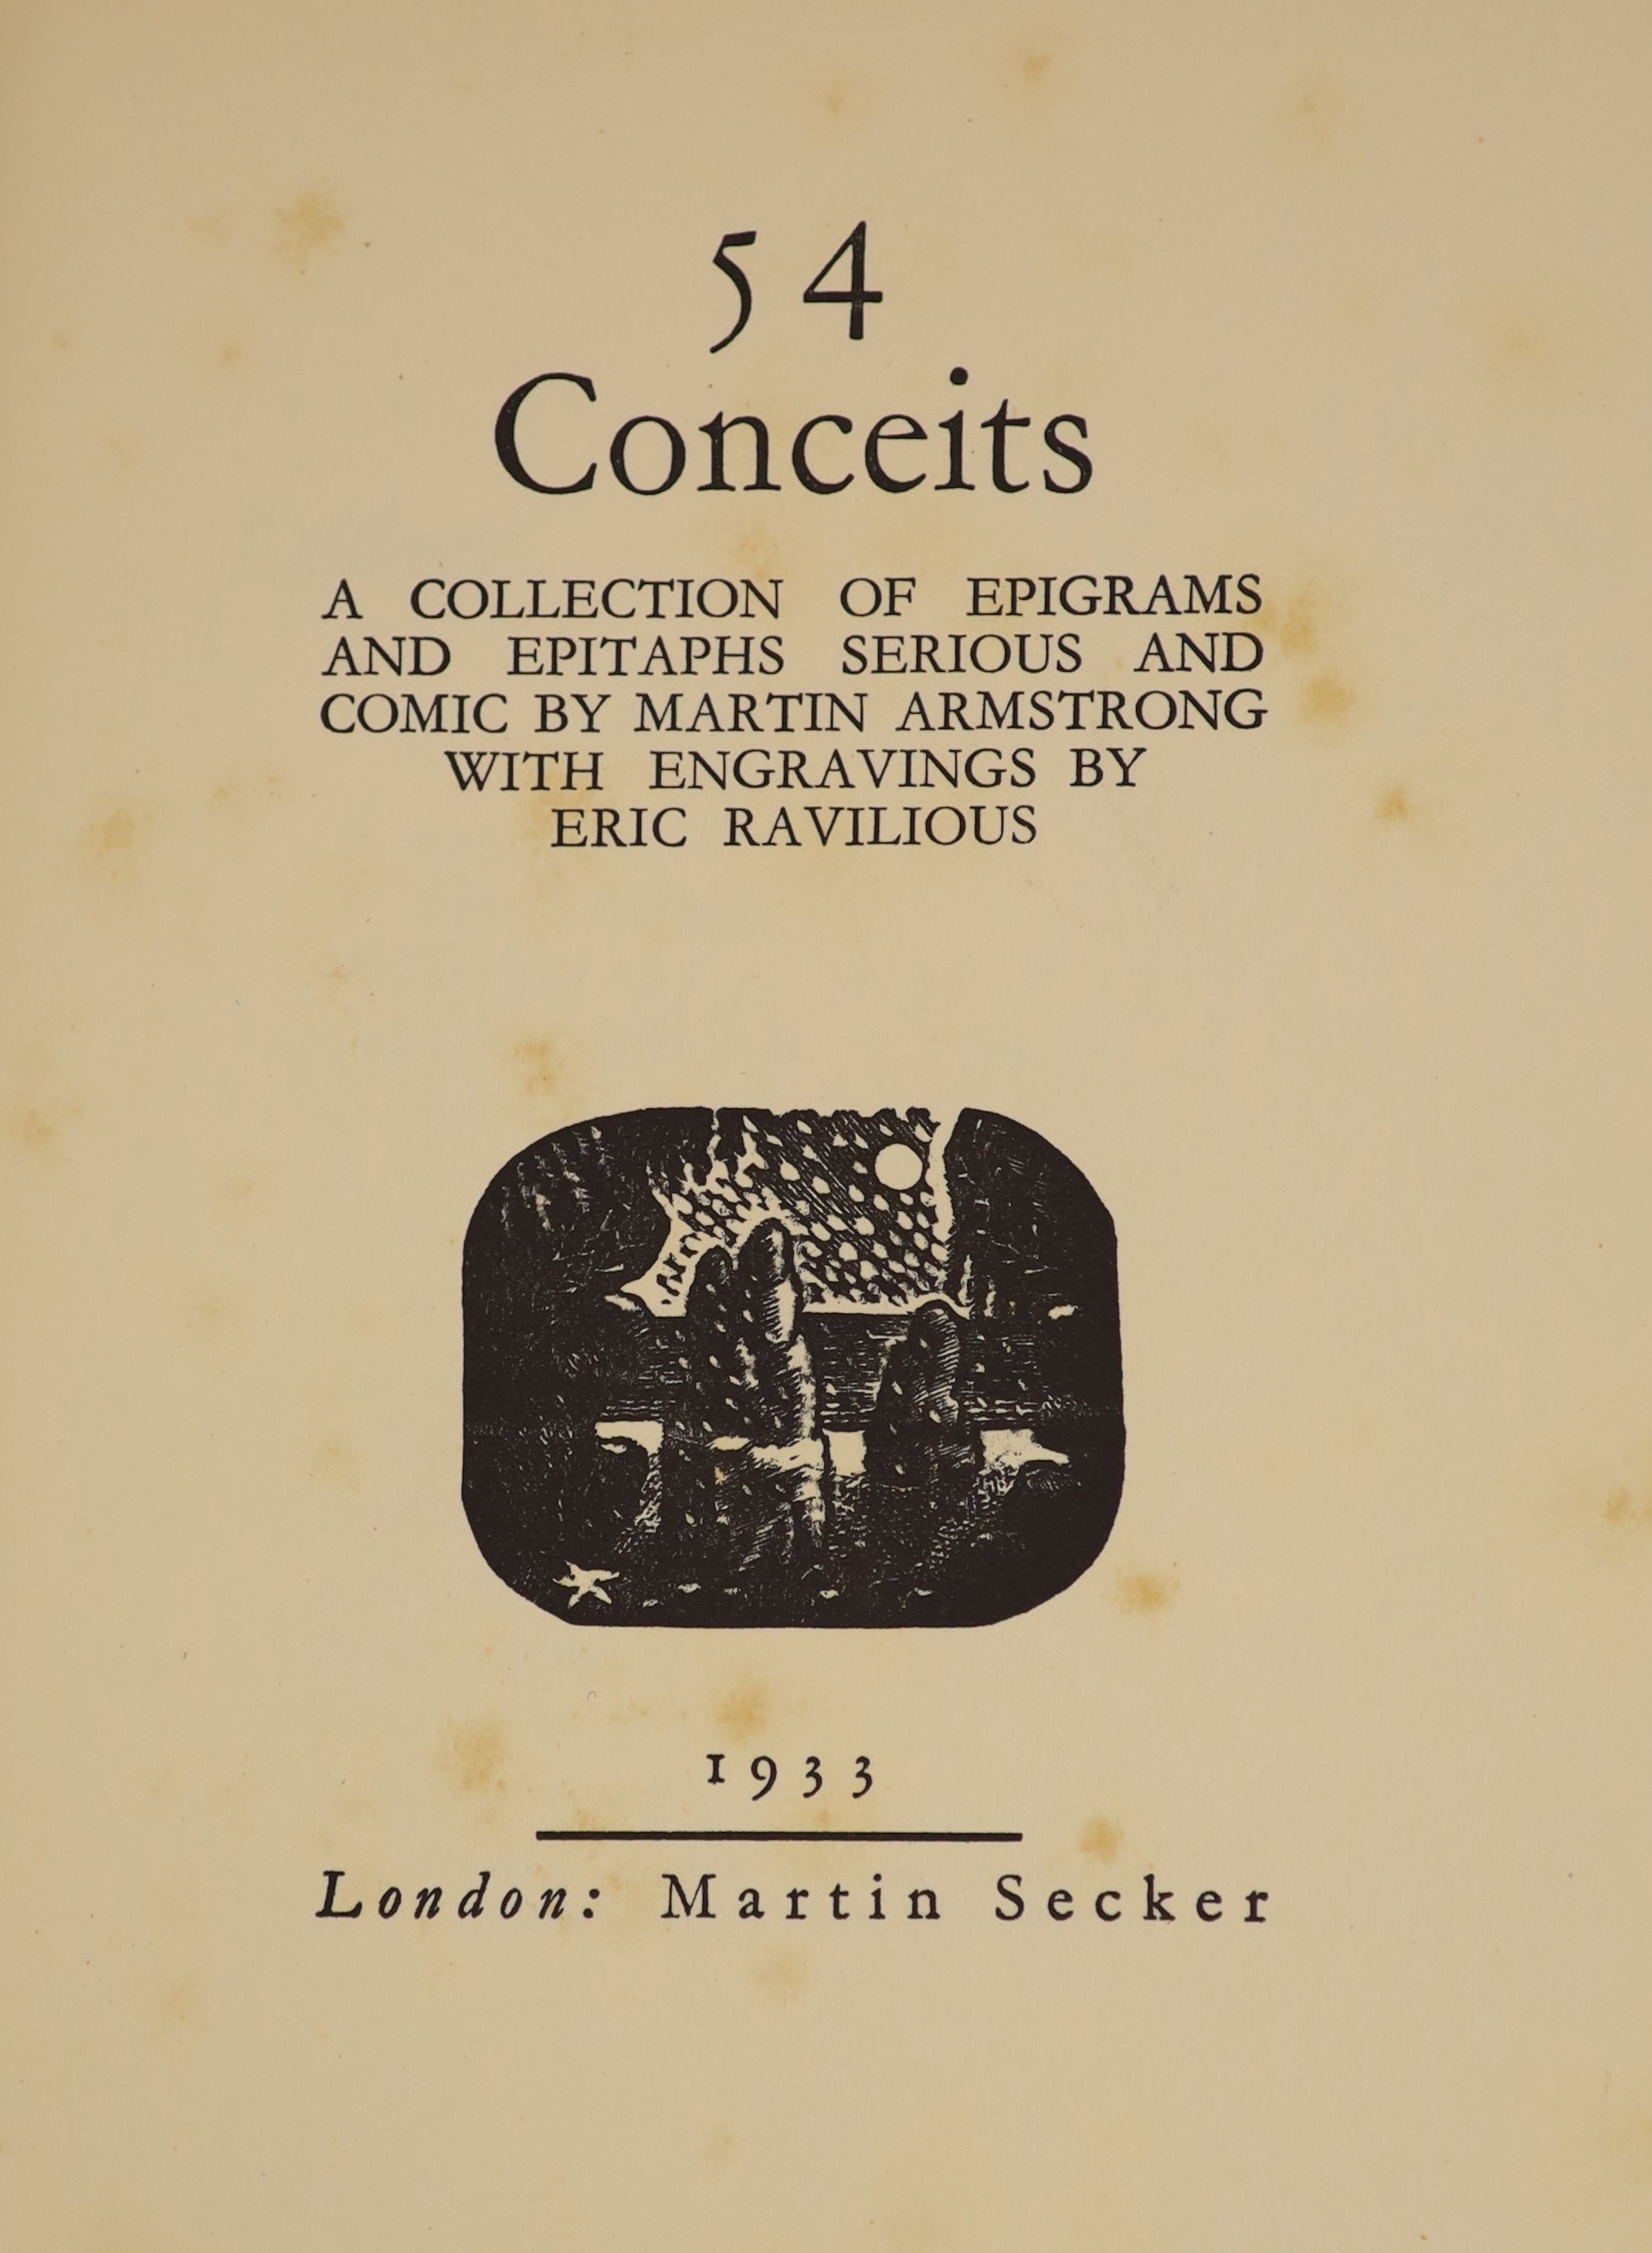 Armstrong, Martin - Fifty-Four Conceits, illustrated by Eric Ravilious, 12mo, with unclipped d/j, Martin Secker, London, 1933